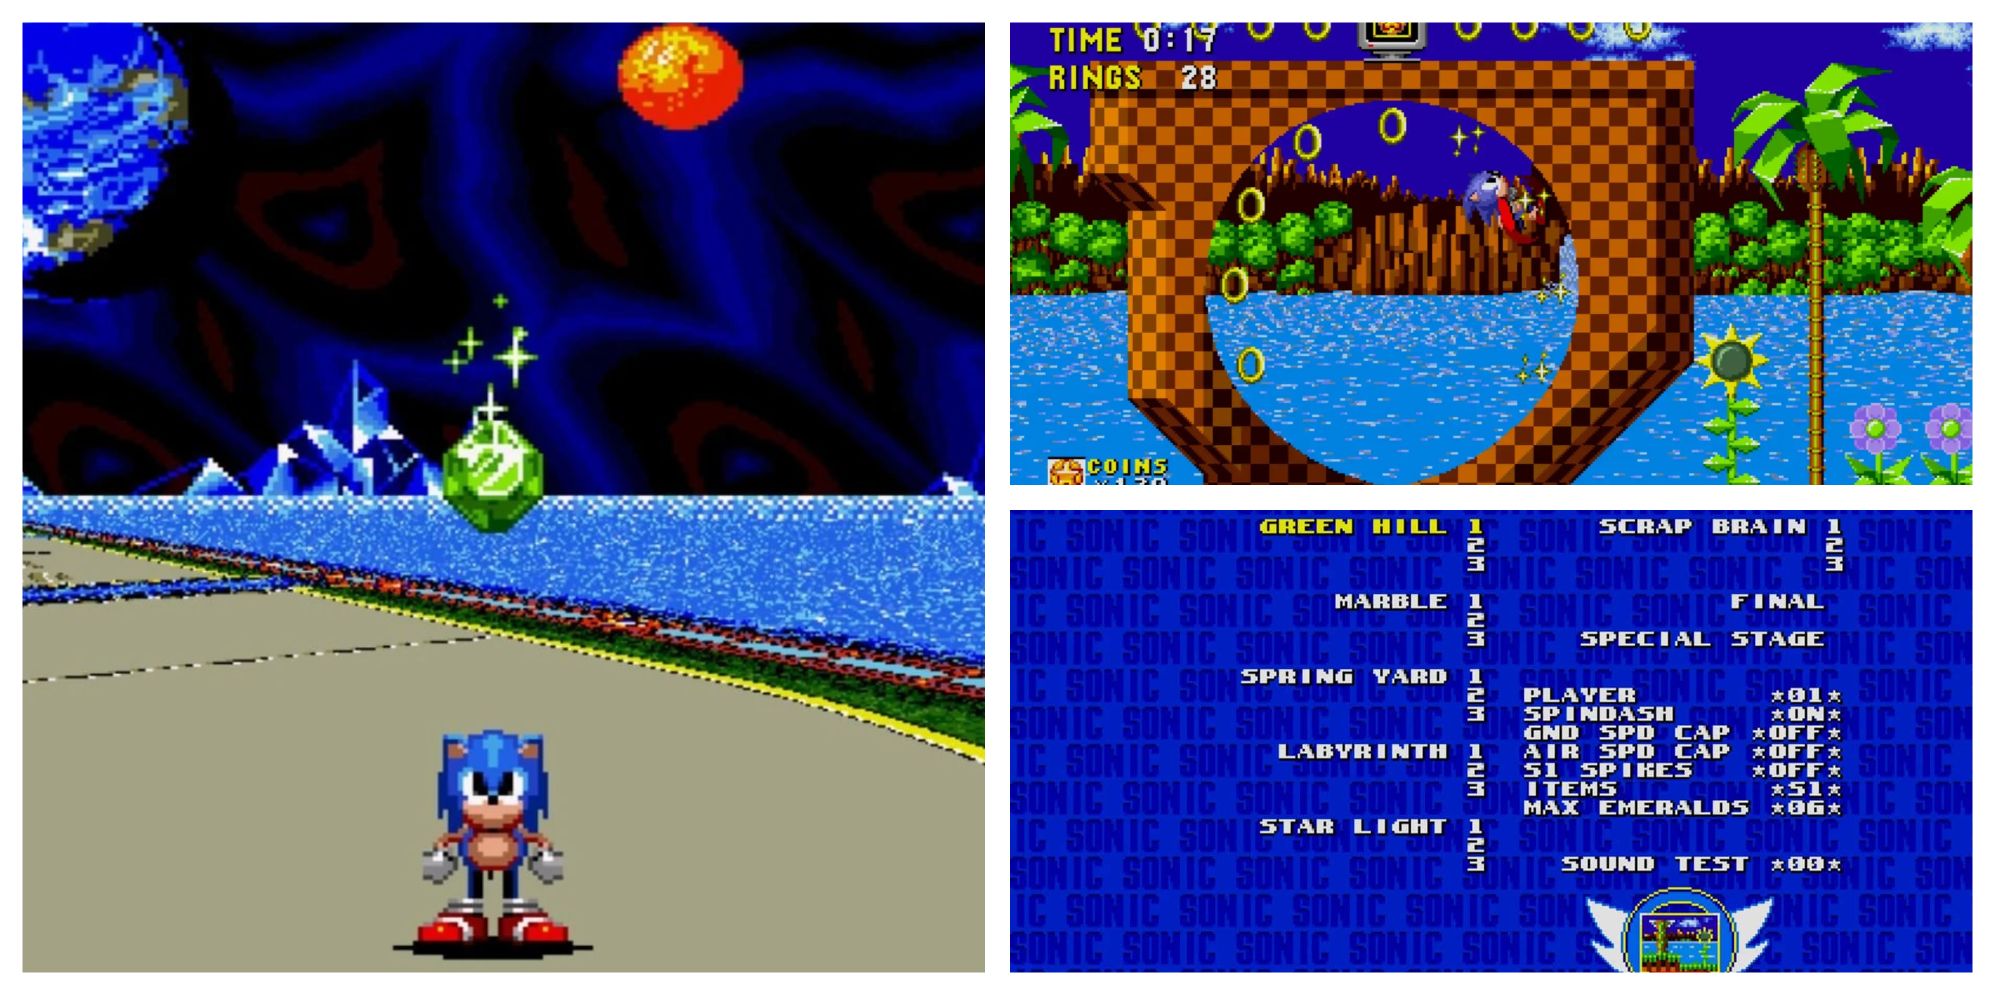 Sonic The Hedgehog 3 and Knuckles HYPER SONIC CHEAT CODE/DEBUG MODE/LEVEL  SELECT (Sonic Origins) 